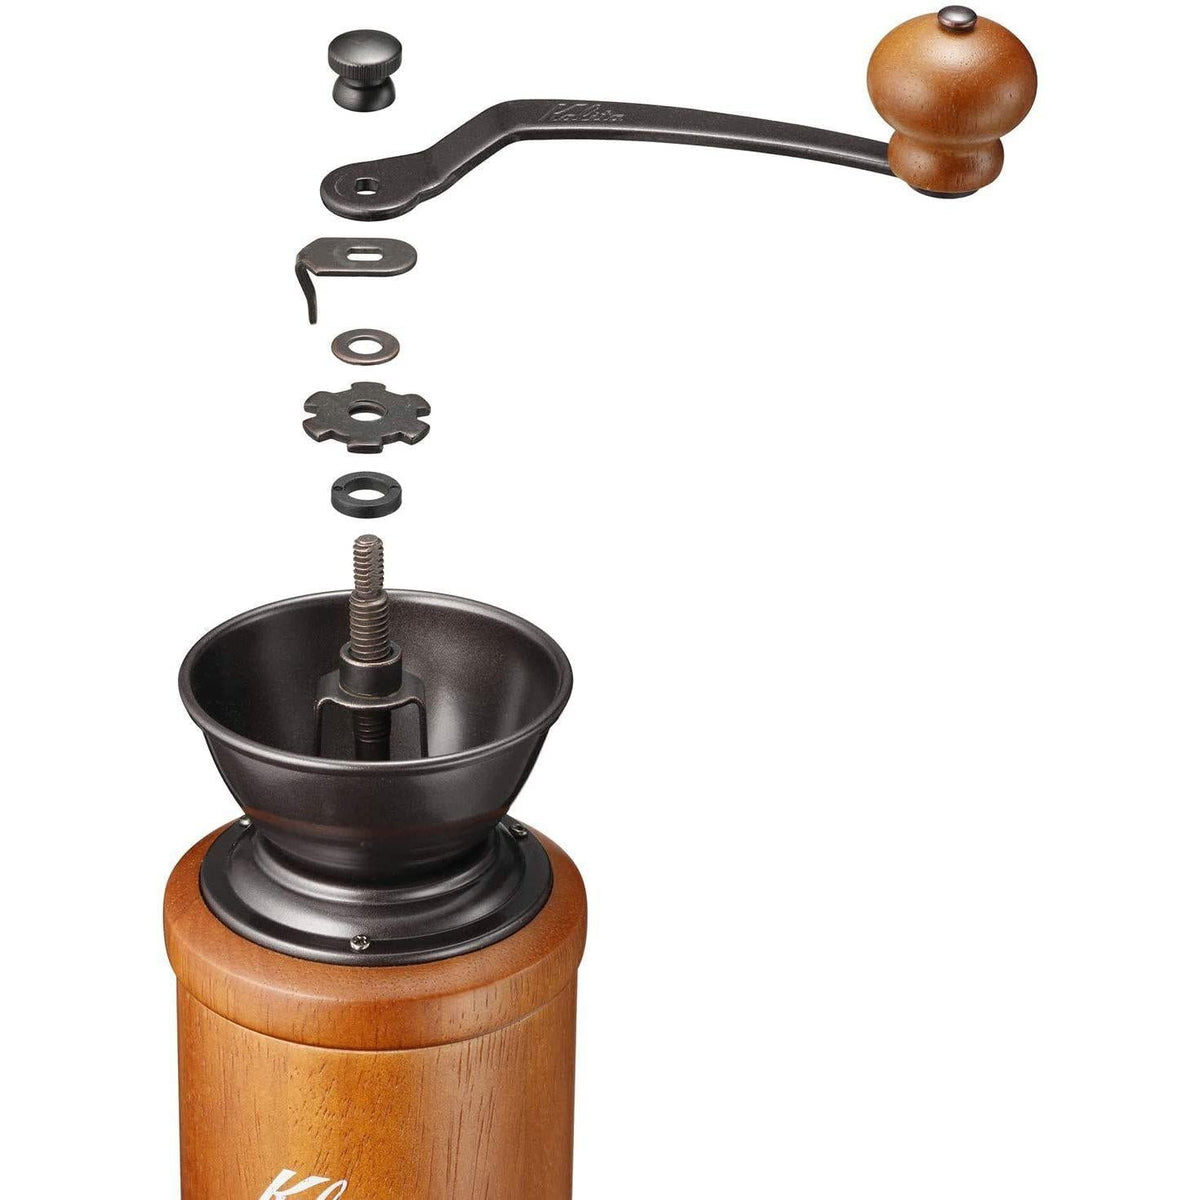 Kalita Kalita Coffee Mill Hand Grinded Battery Operated Coffee